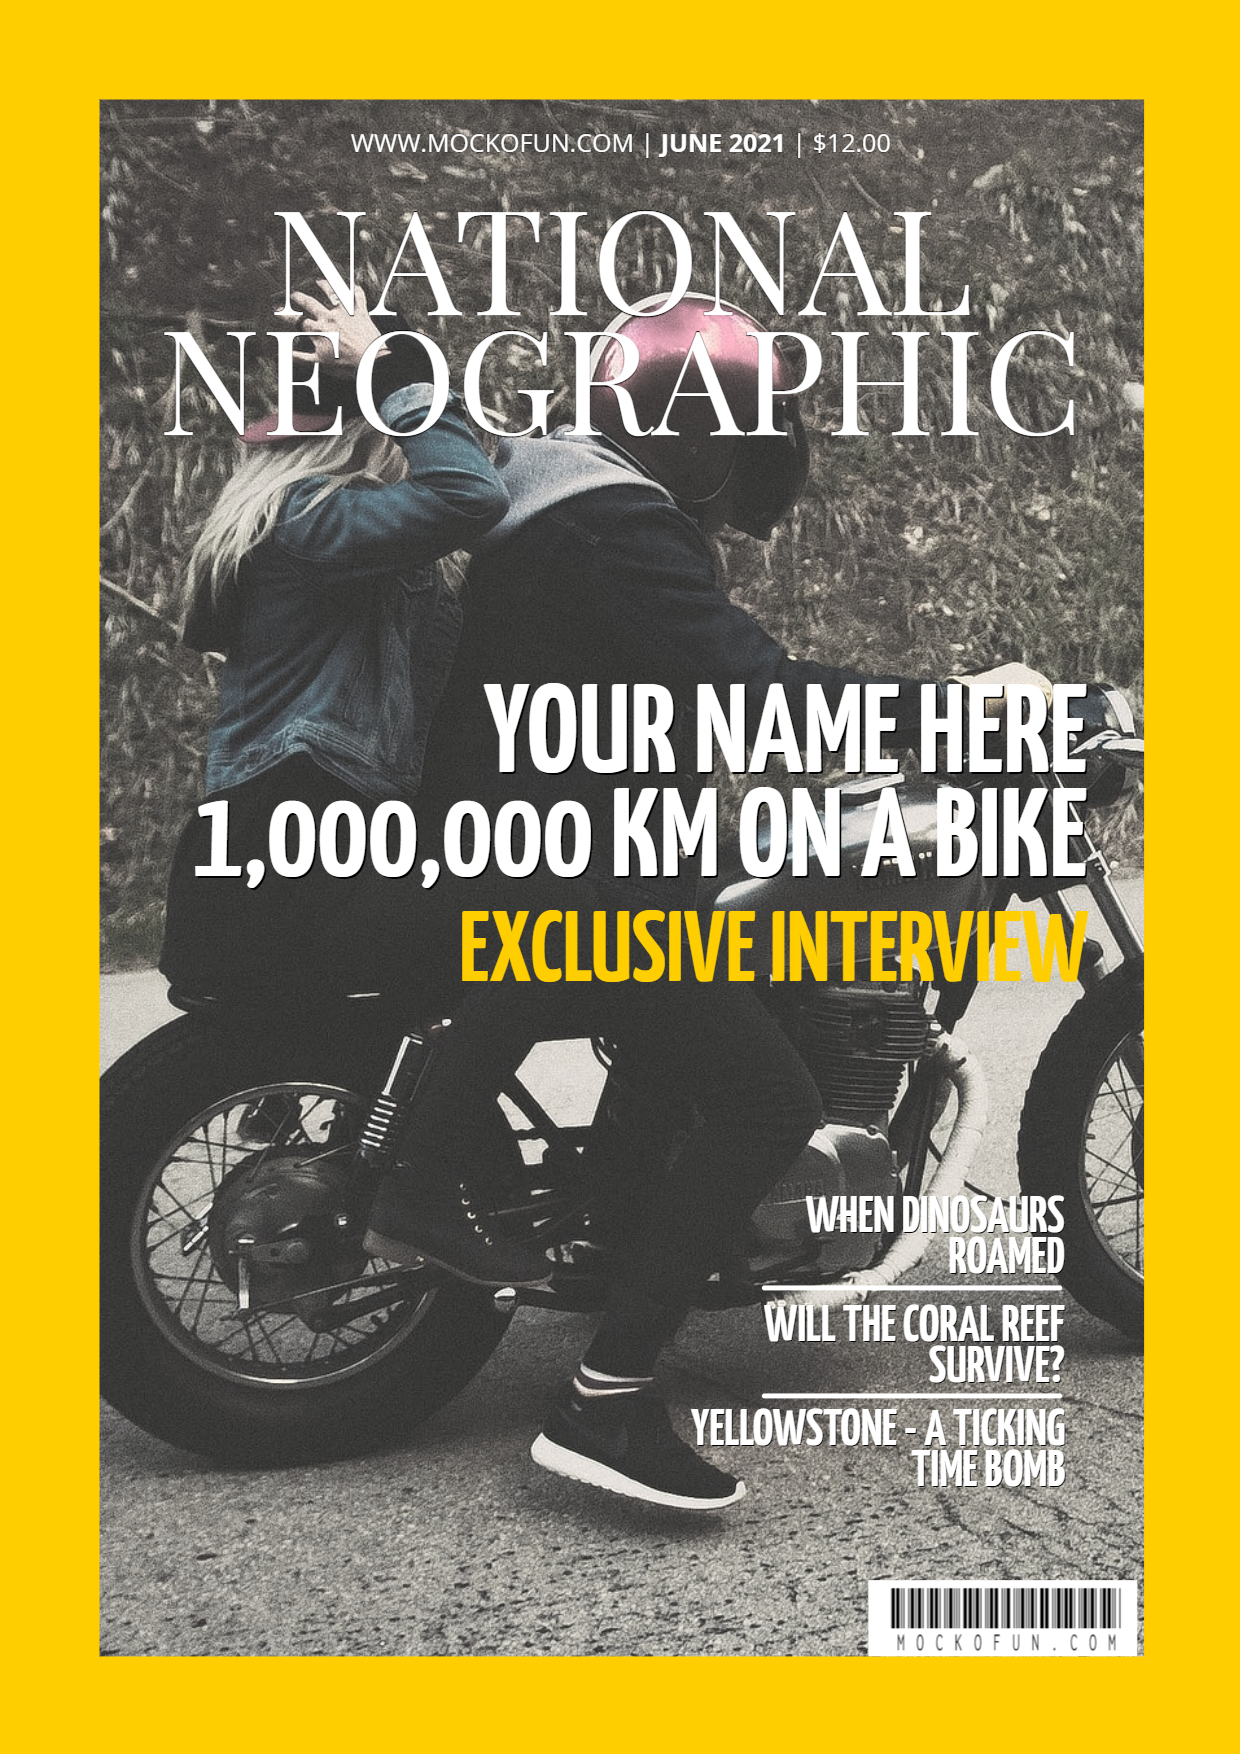 National Geographic Cover Template MockoFUN